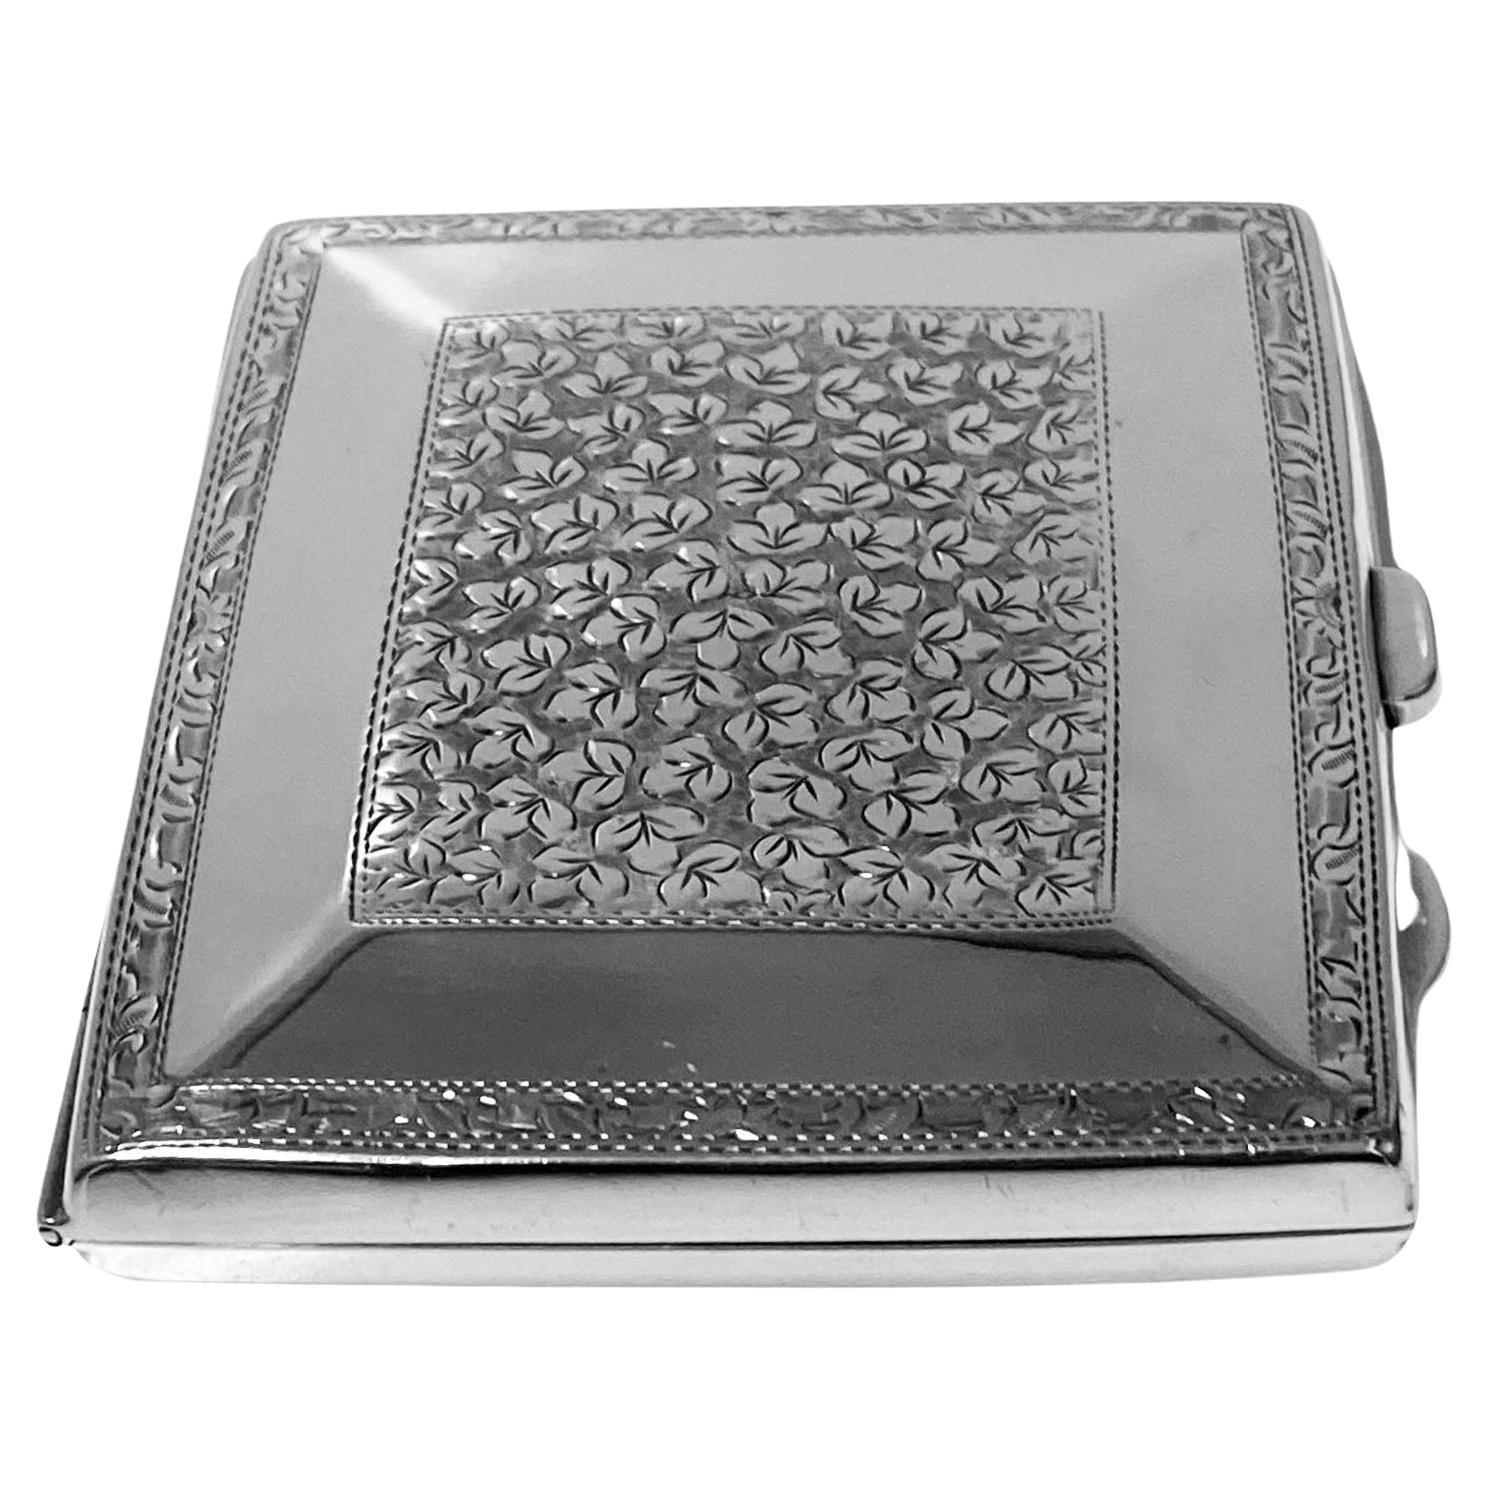 English Silver Cigarette Case Birmingham 1911, Joseph Gloster Ltd. Slightly concave rectangular shape case;  front, reverse and outside border with engraved central panel decoration, plain polished silver inner border margin. Vacant shield to front.